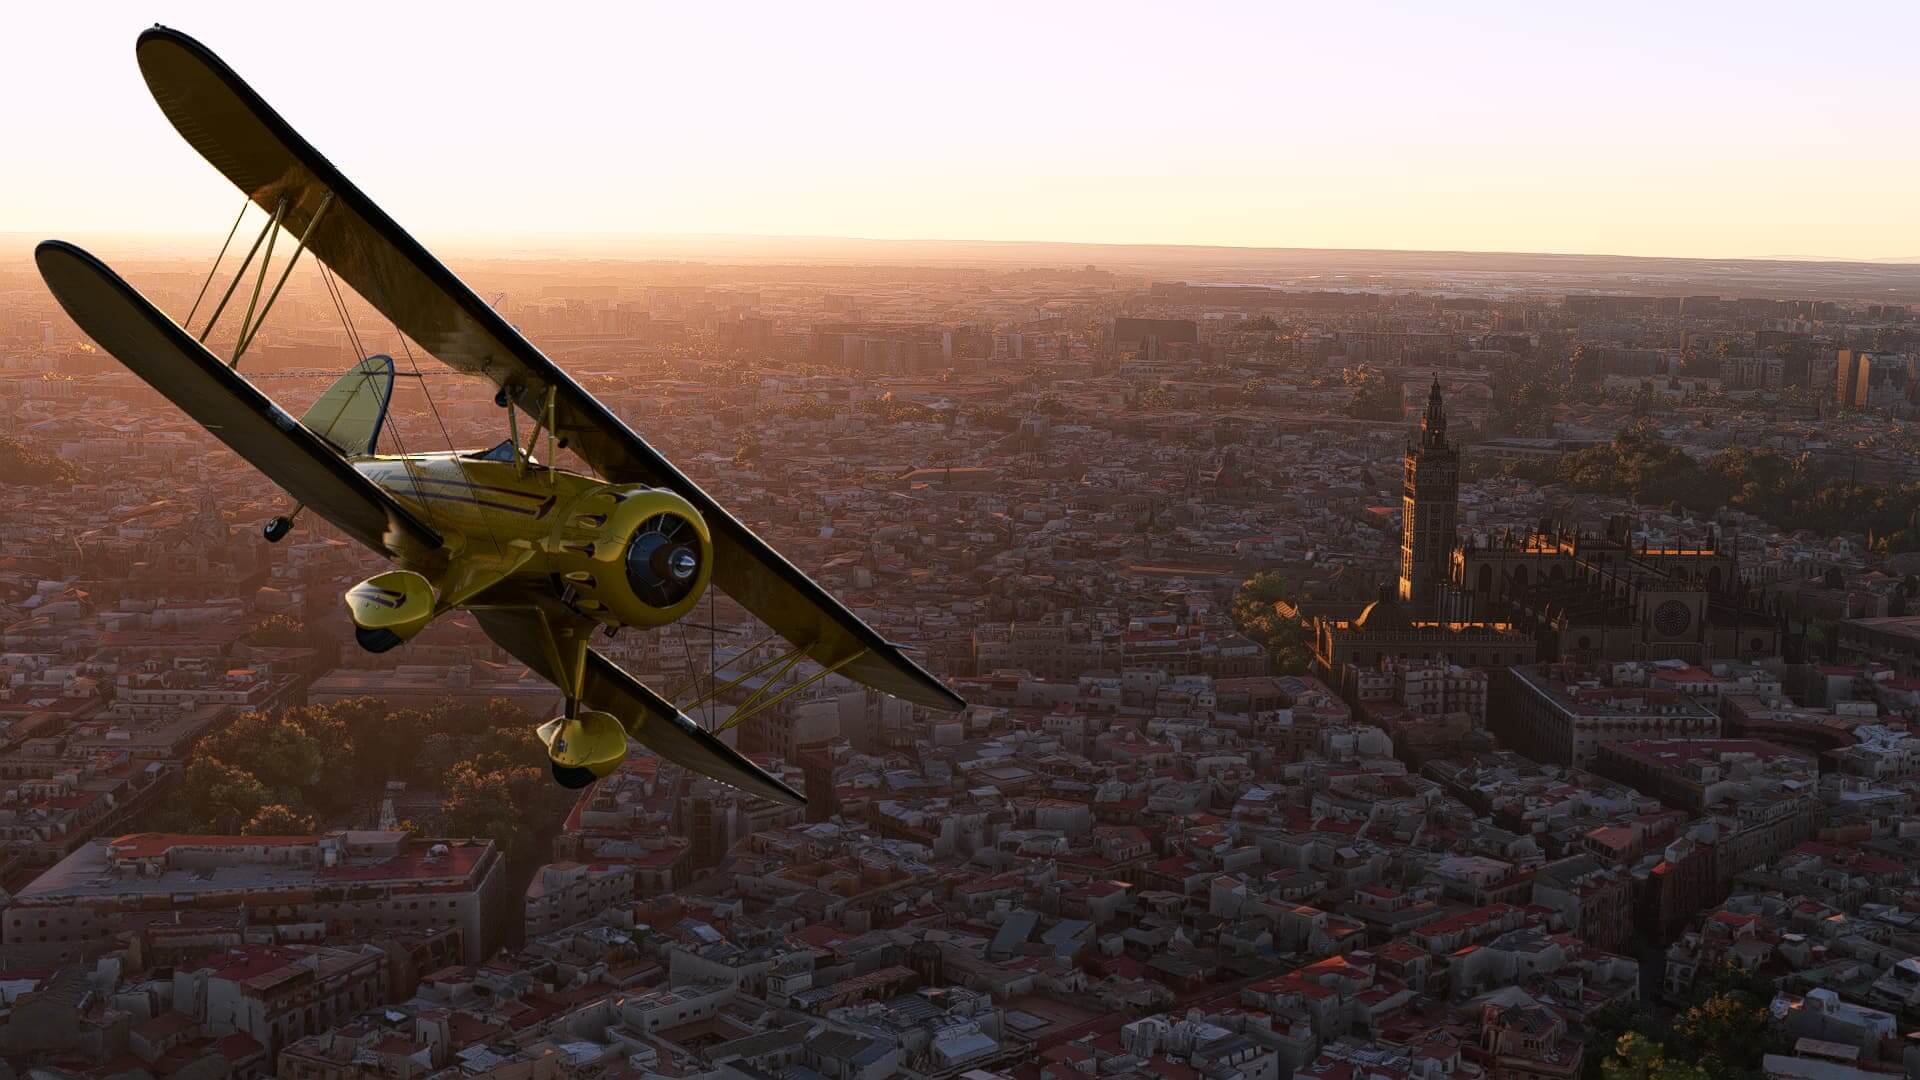 A yellow Pitt propeller aircraft banks left over a dense city, with a cathedral towering over houses below